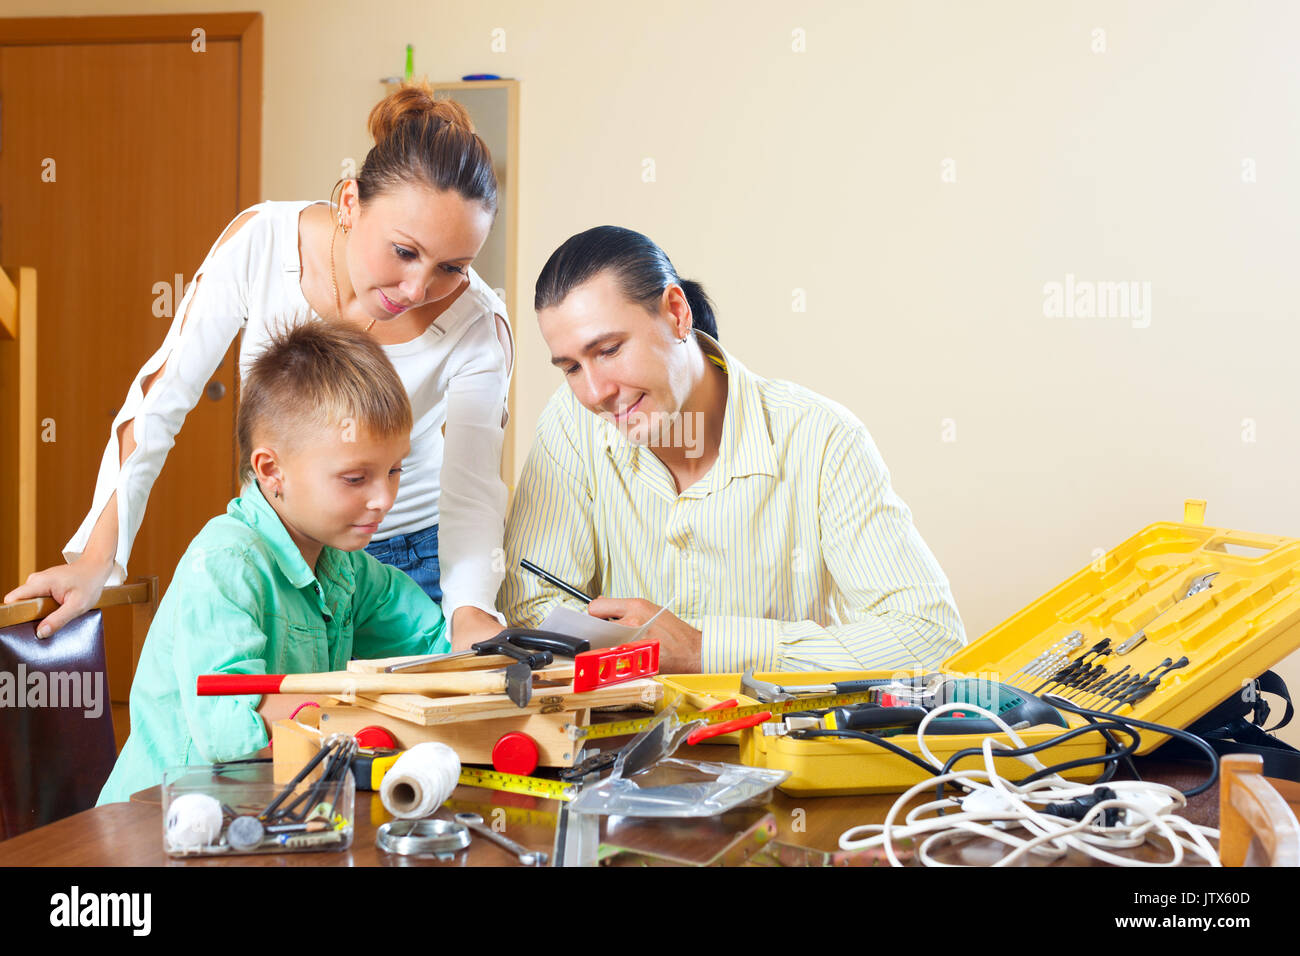 Ordinary family of three doing something with the working tools at home Stock Photo